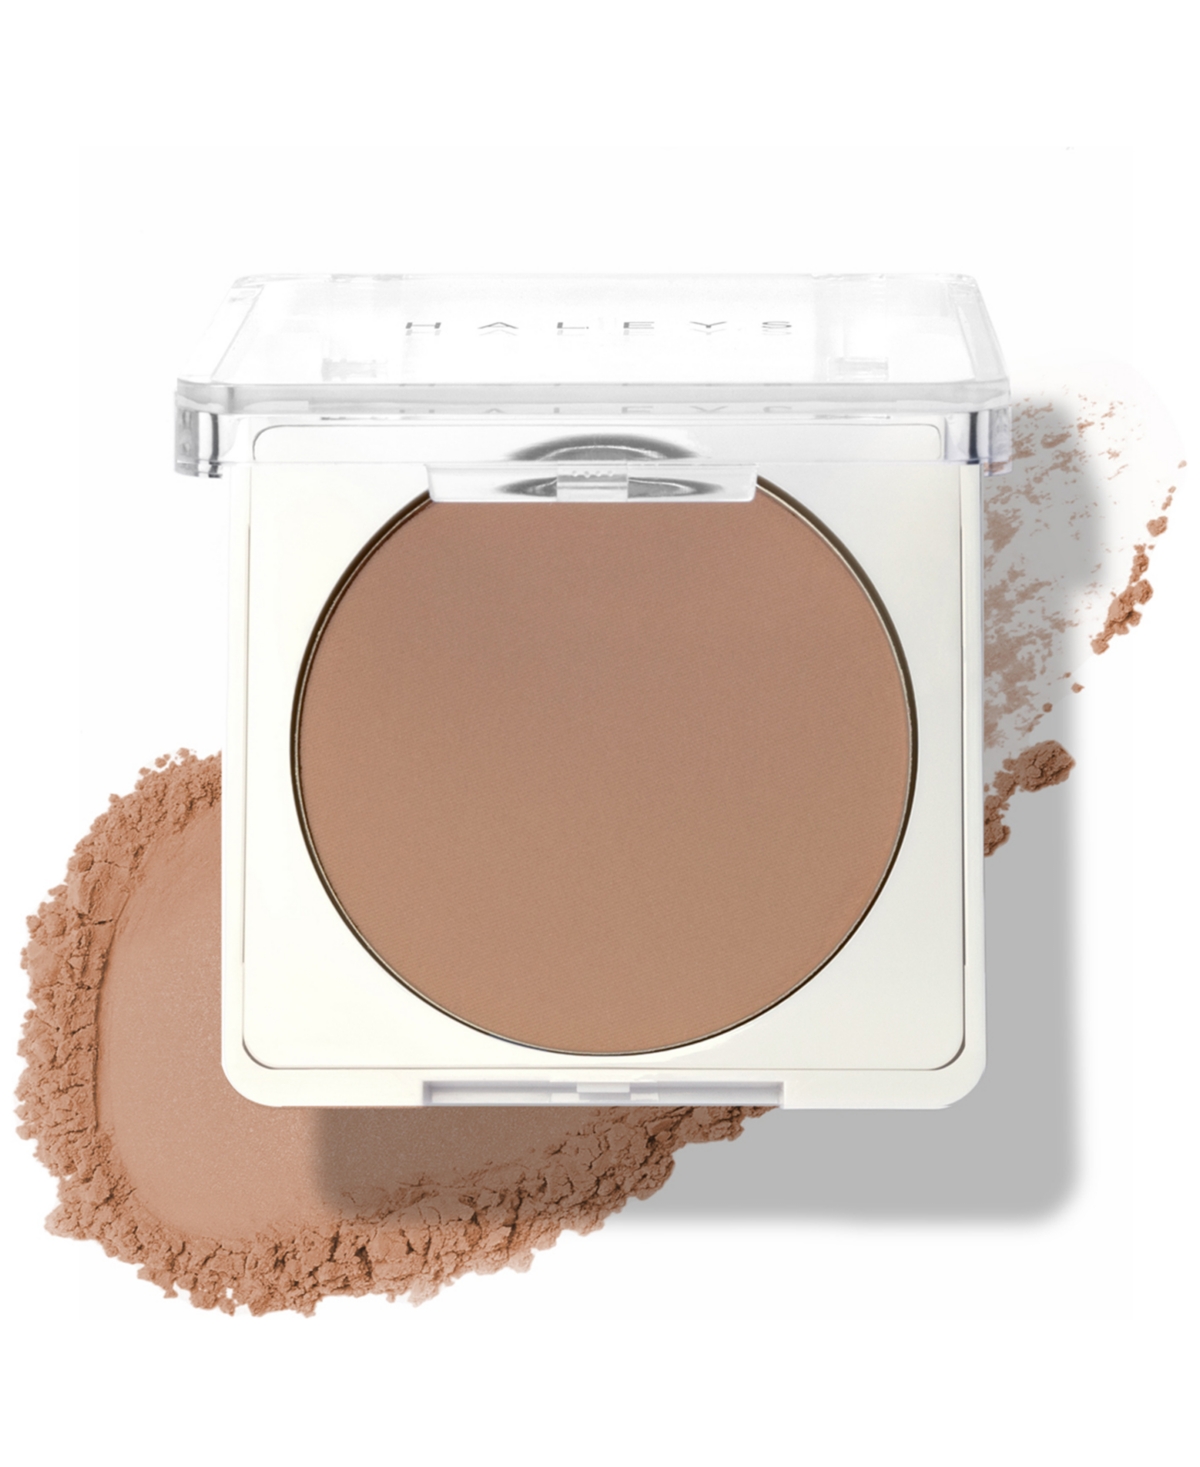 Haleys Beauty Re-sculpt Smoothing Contour Powder In Light